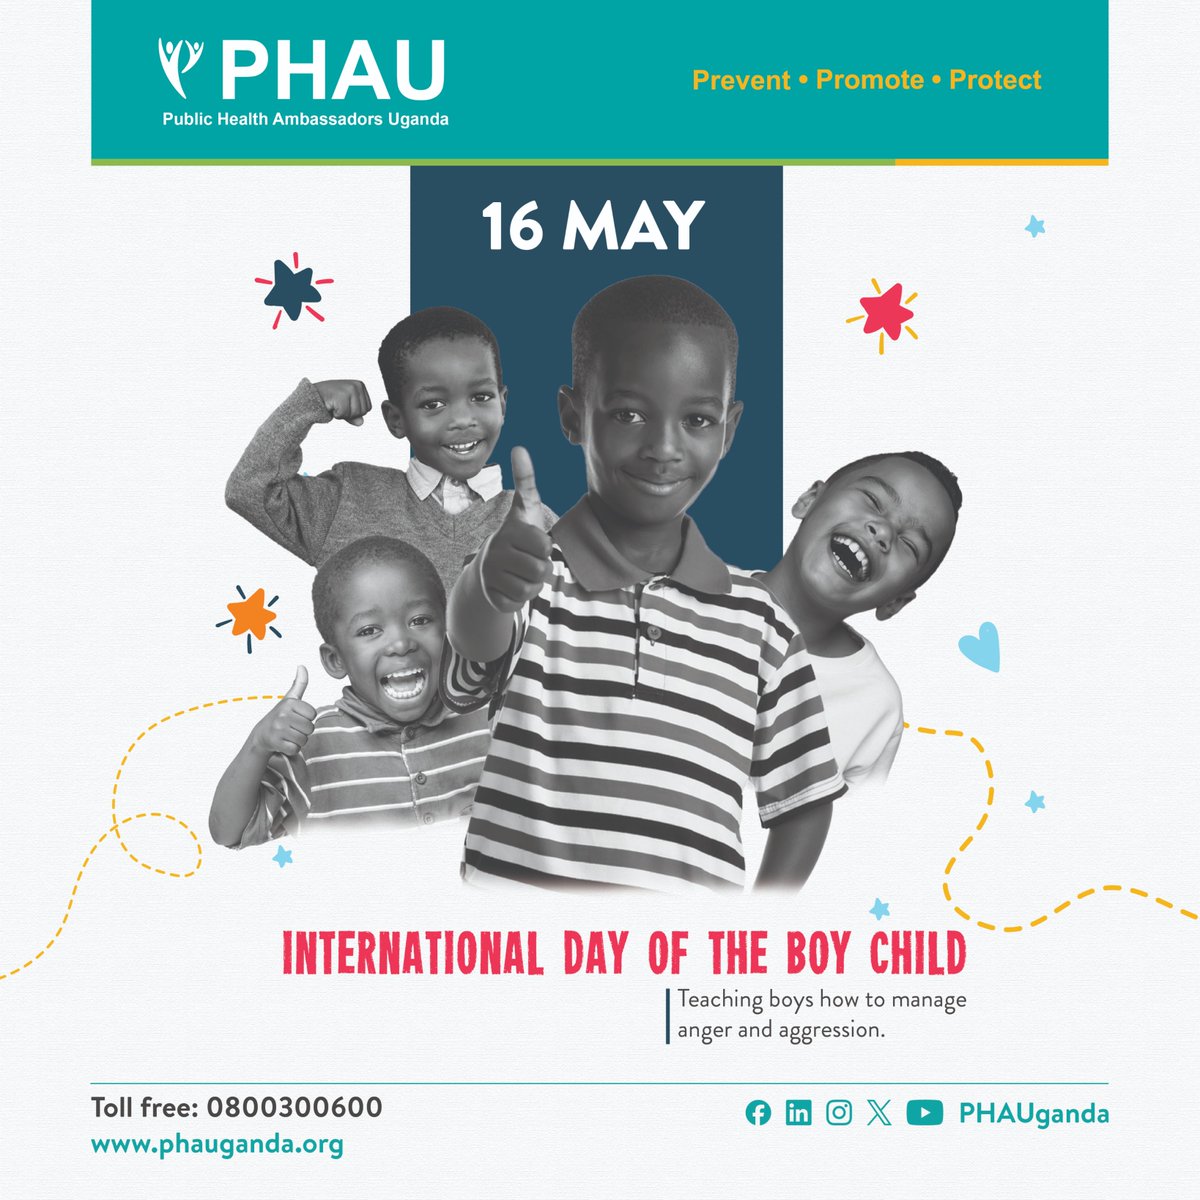 On this International Day of the Boy Child, we spotlight the health and well-being of boys everywhere. Let's build a world where every boy can thrive and grow strong & confident. #PHAUCARES #boychild #wellbeing #IDBC2024